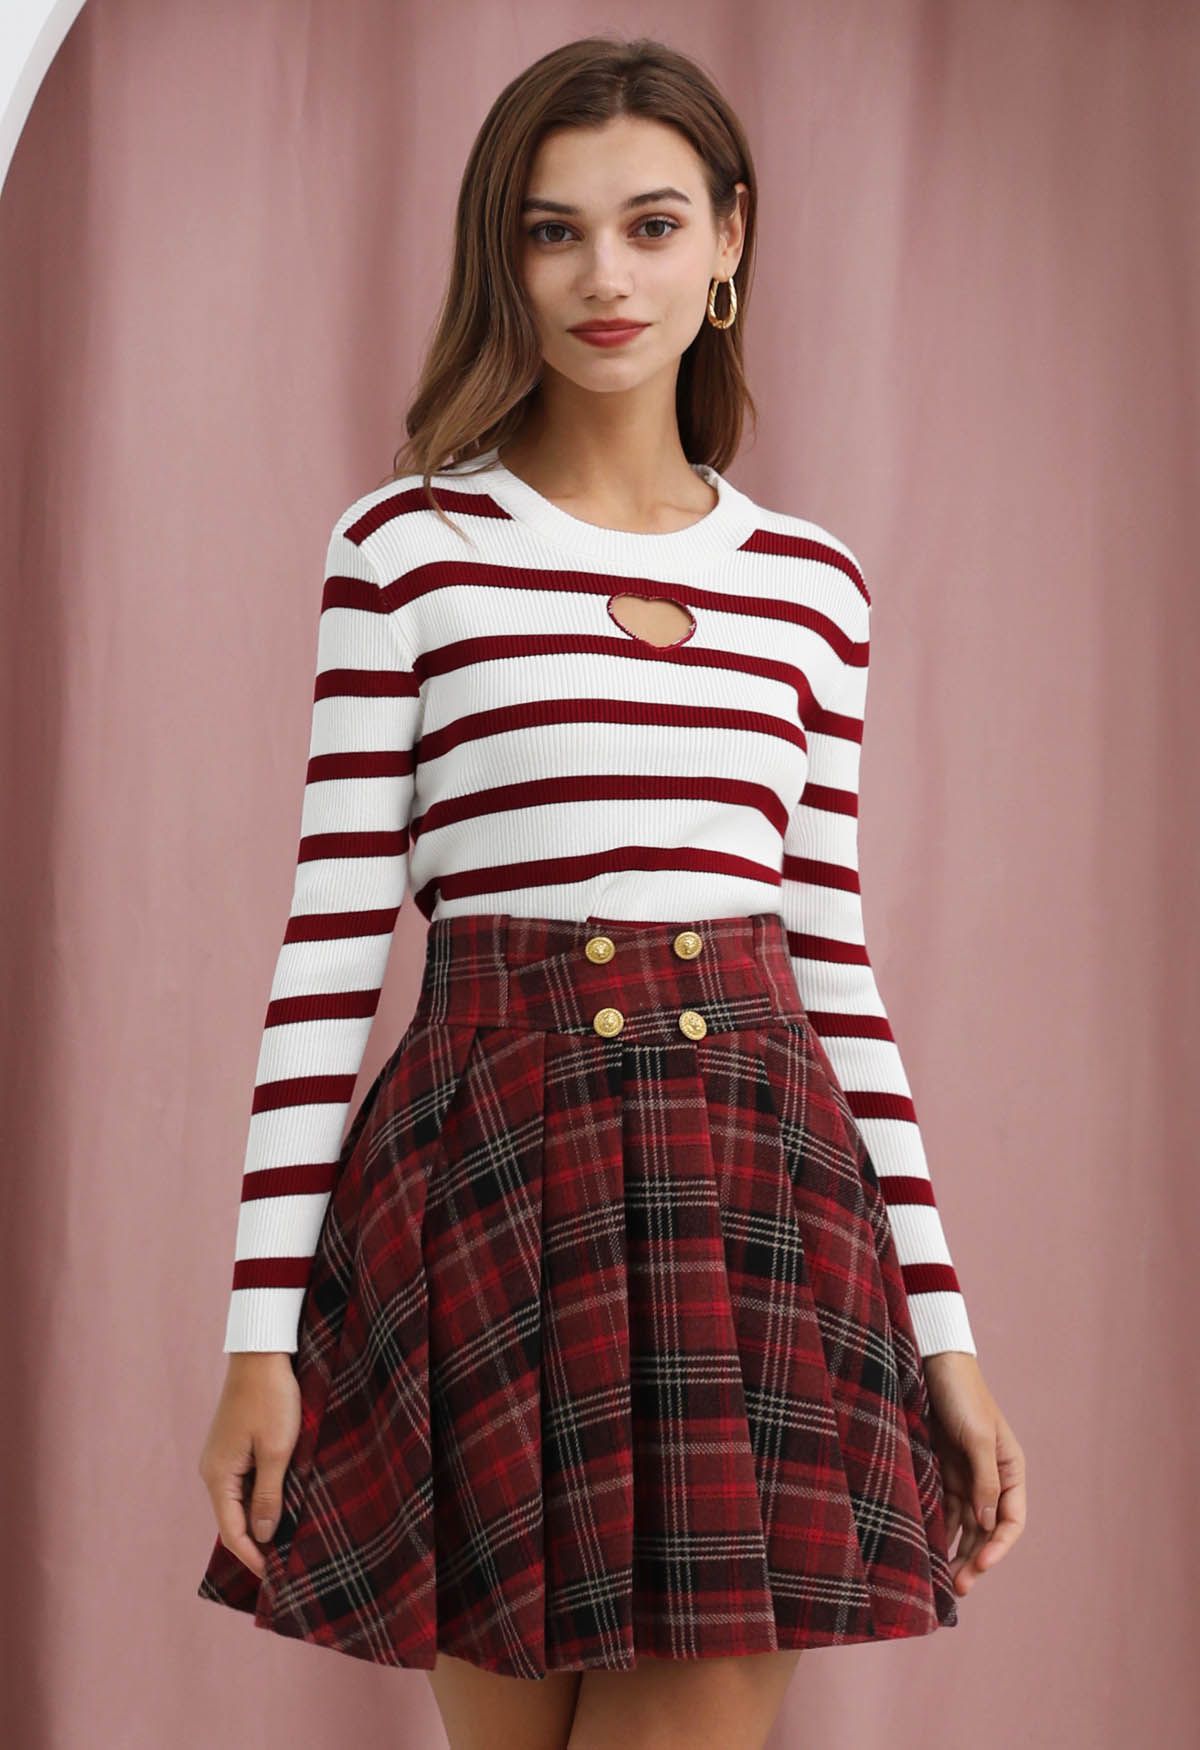 Heart Cut Out Stripe Knit Top in Red